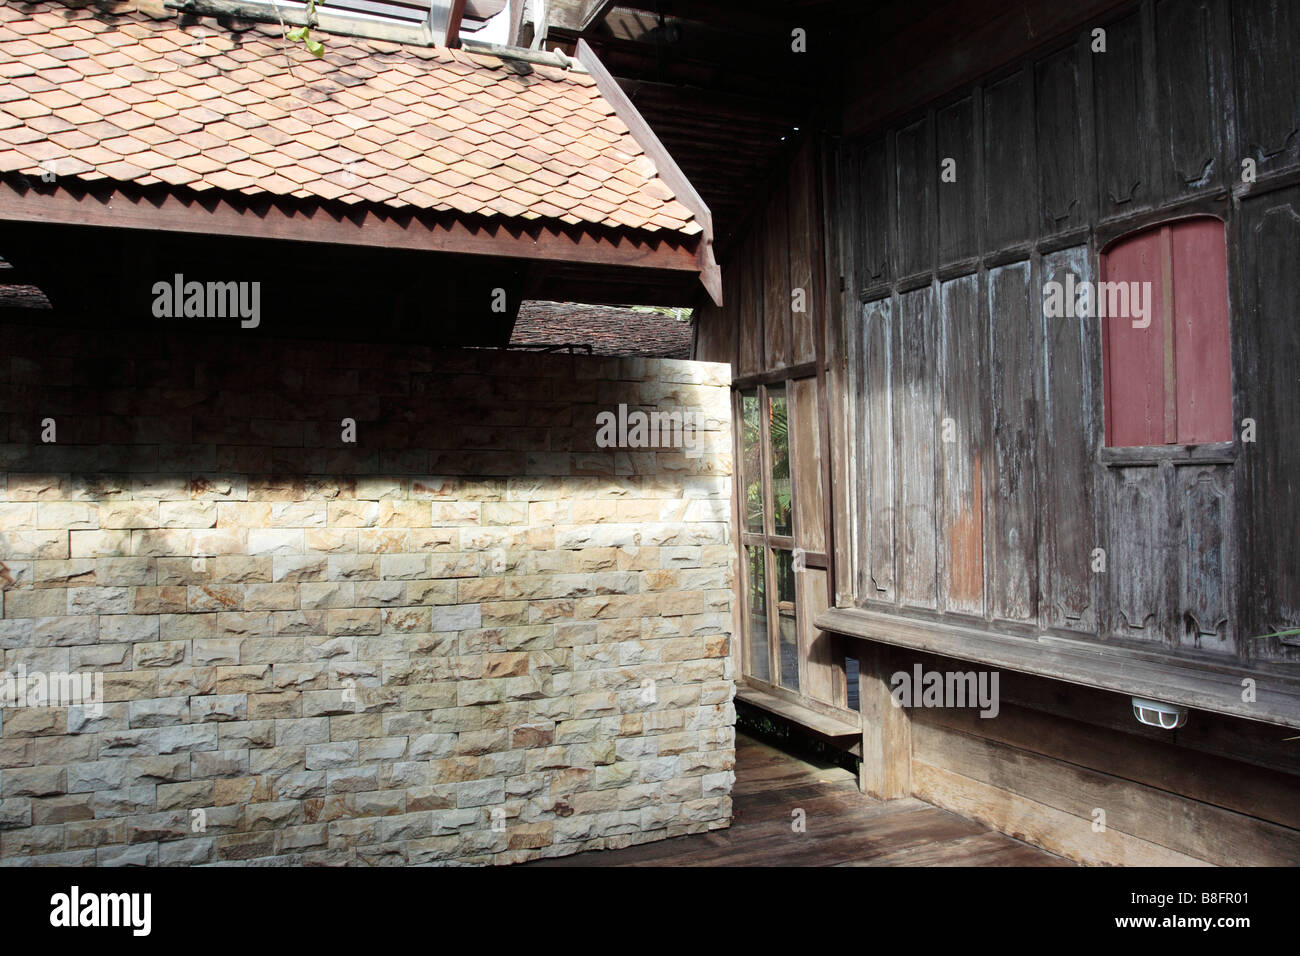 Traditional wooden Malay house in Terengganu, Malaysia. Stock Photo